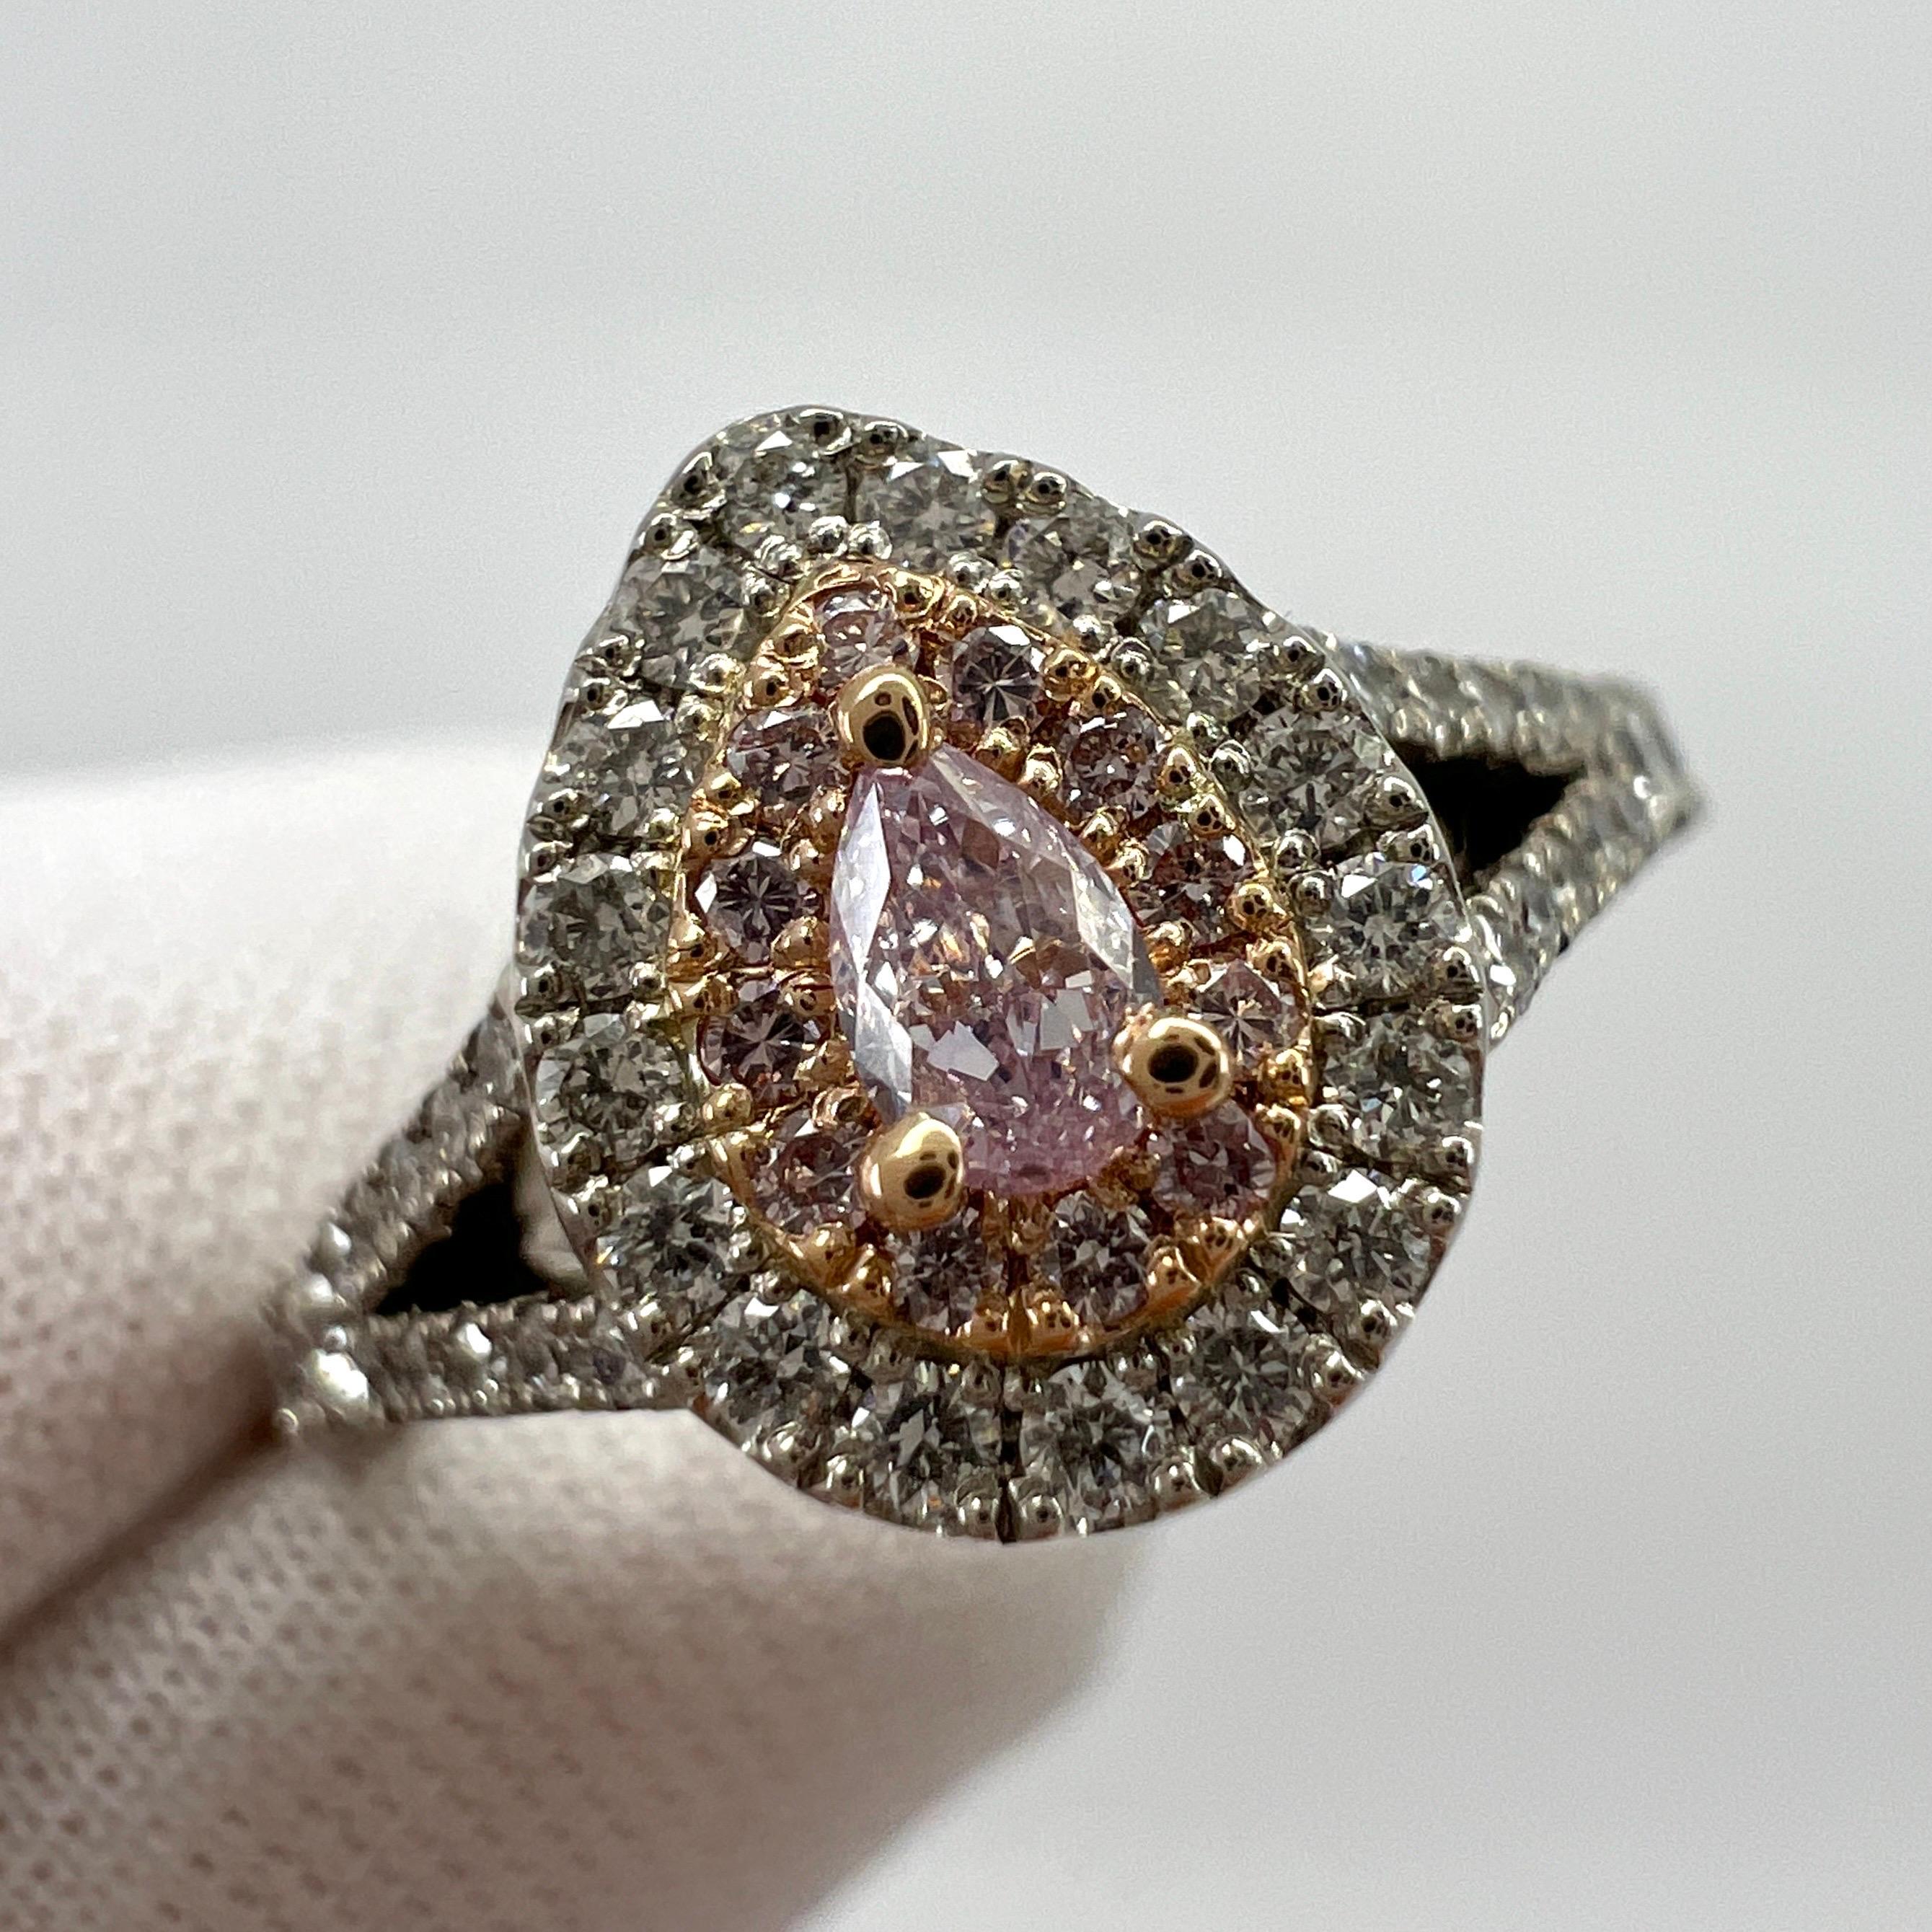 Fine Untreated Fancy Light Pink Diamond 18k Rose And White Gold Cluster Halo Ring.

Beautifully designed ring featuring an IGI certified 0.10 carat natural fancy light pink colour diamond.
A unique and rare colour diamond with an excellent pear cut